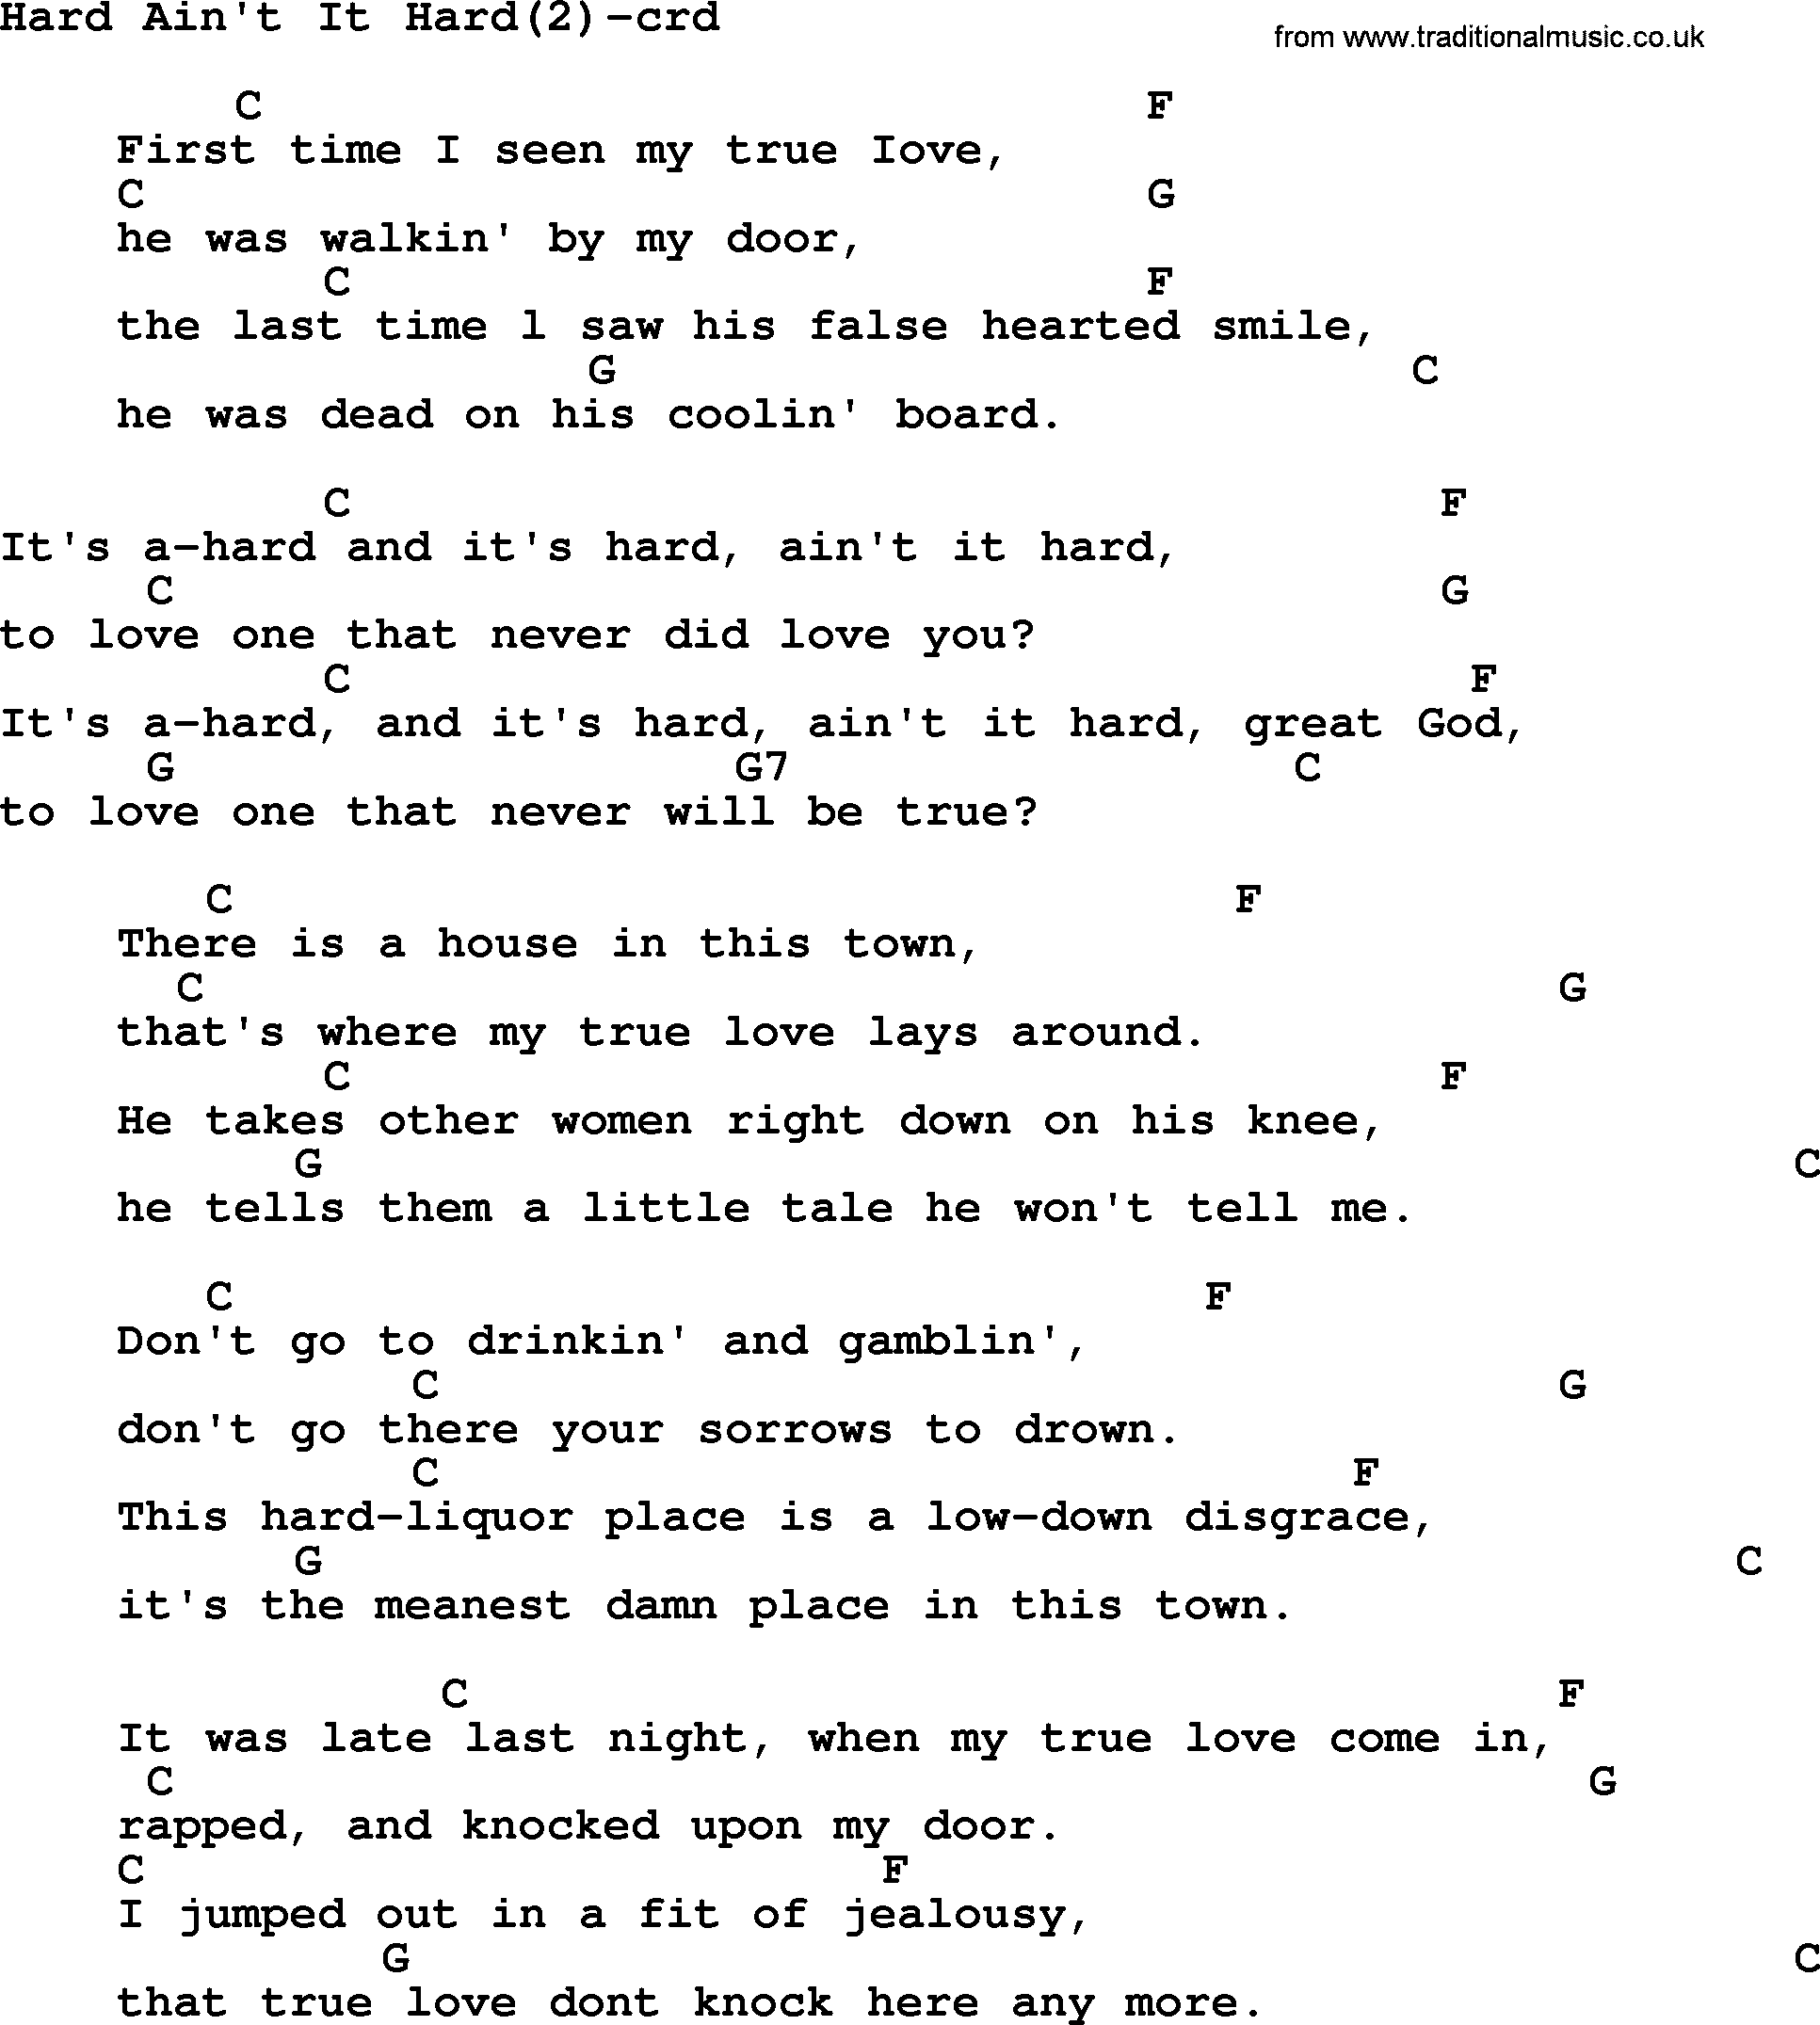 Woody Guthrie song Hard Ain't It Hard(2) lyrics and chords